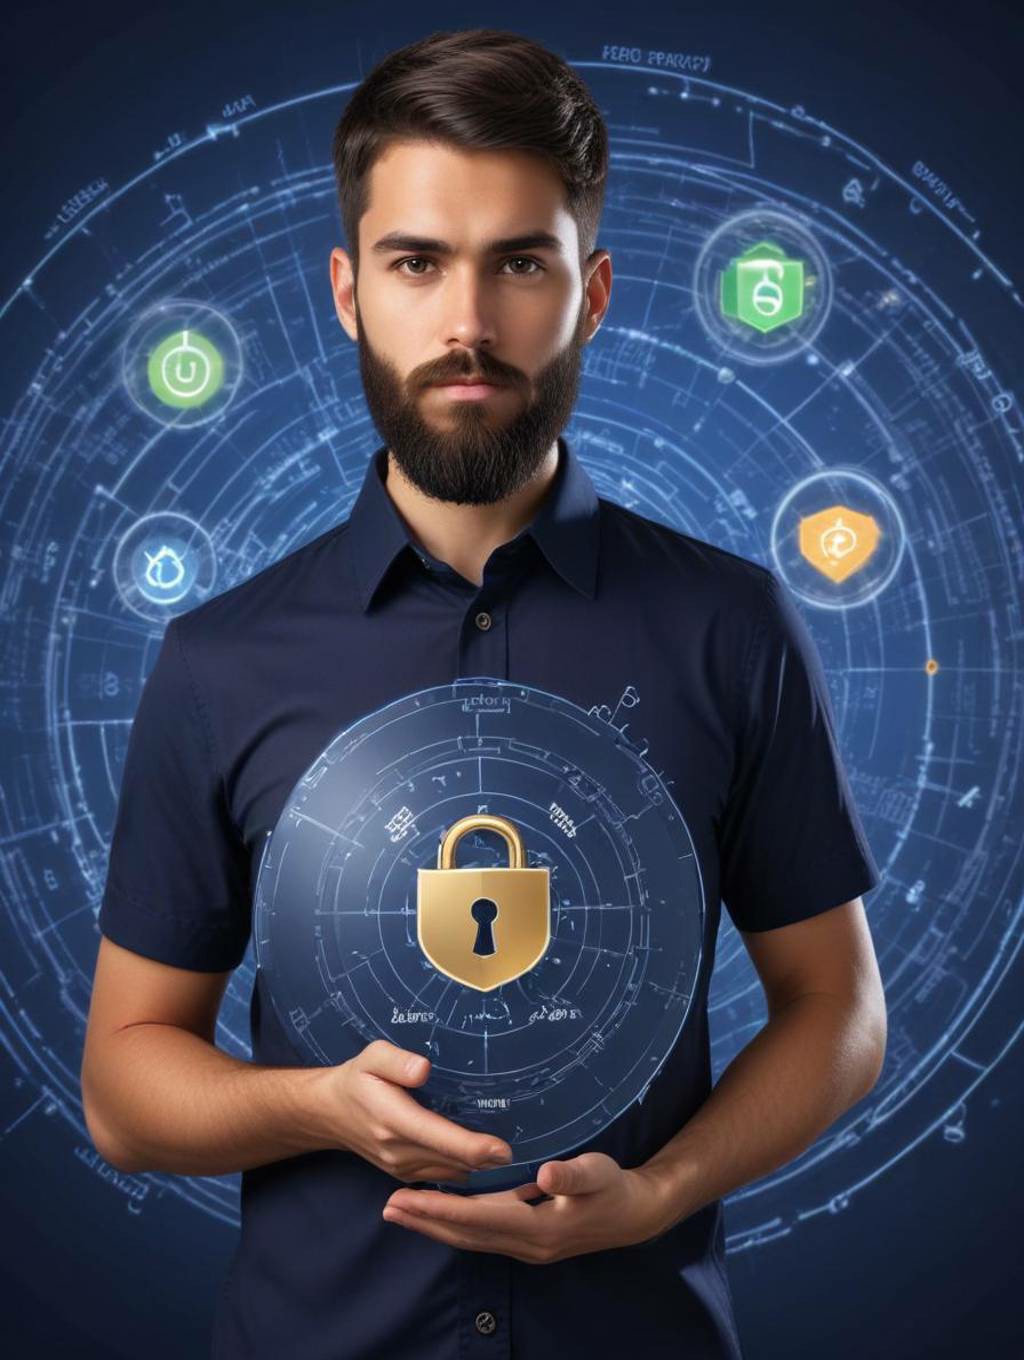 Cybersecurity Men: Gallery Frames & Profile Pictures-Theme:5